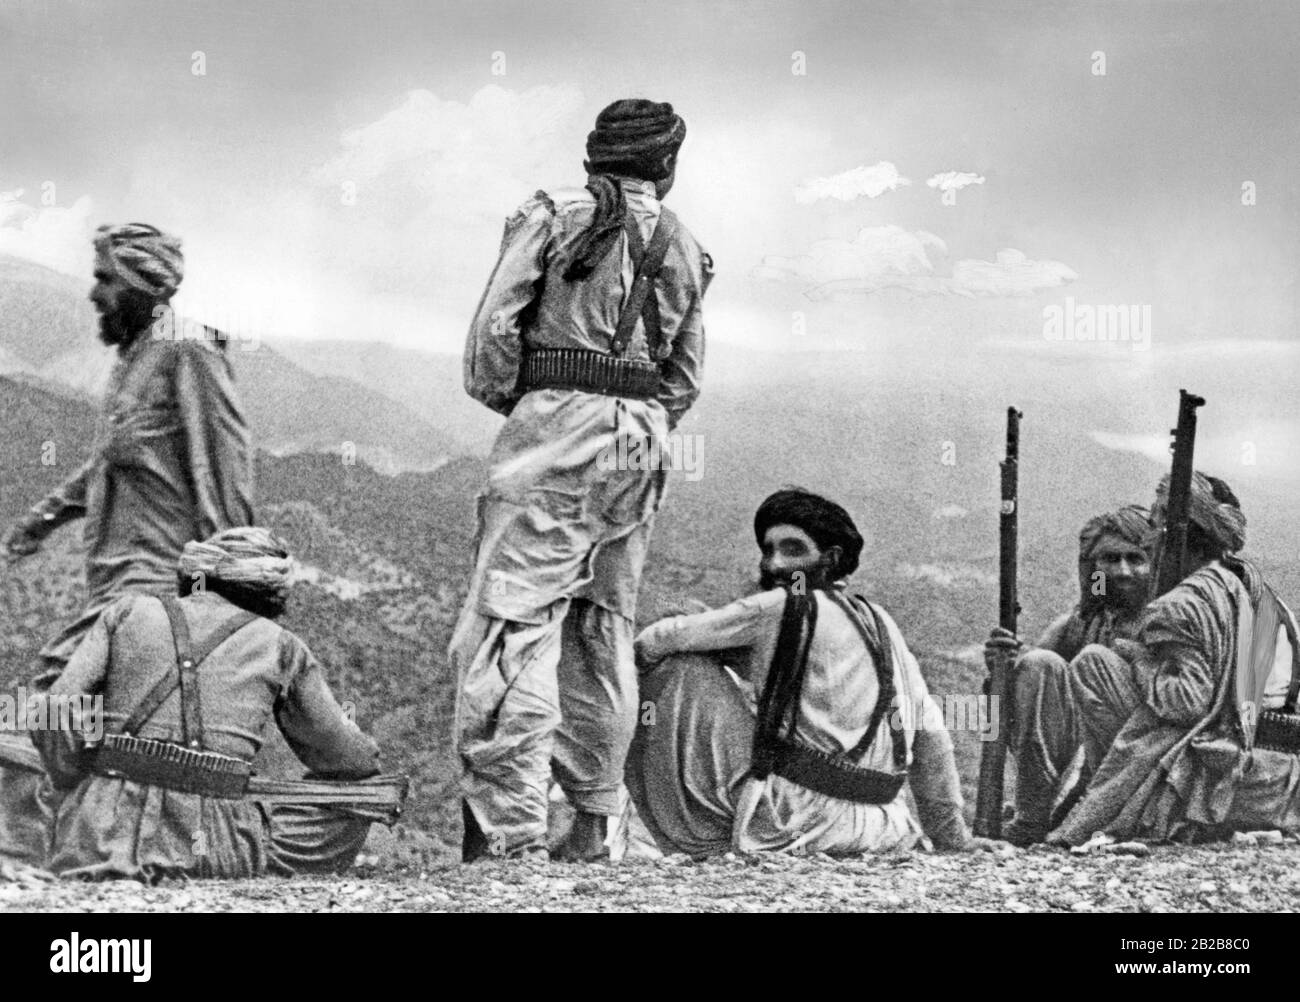 Wazir pathfinders for the British troops in the Waziristan region of north-western British India, now Pakistan. Stock Photo